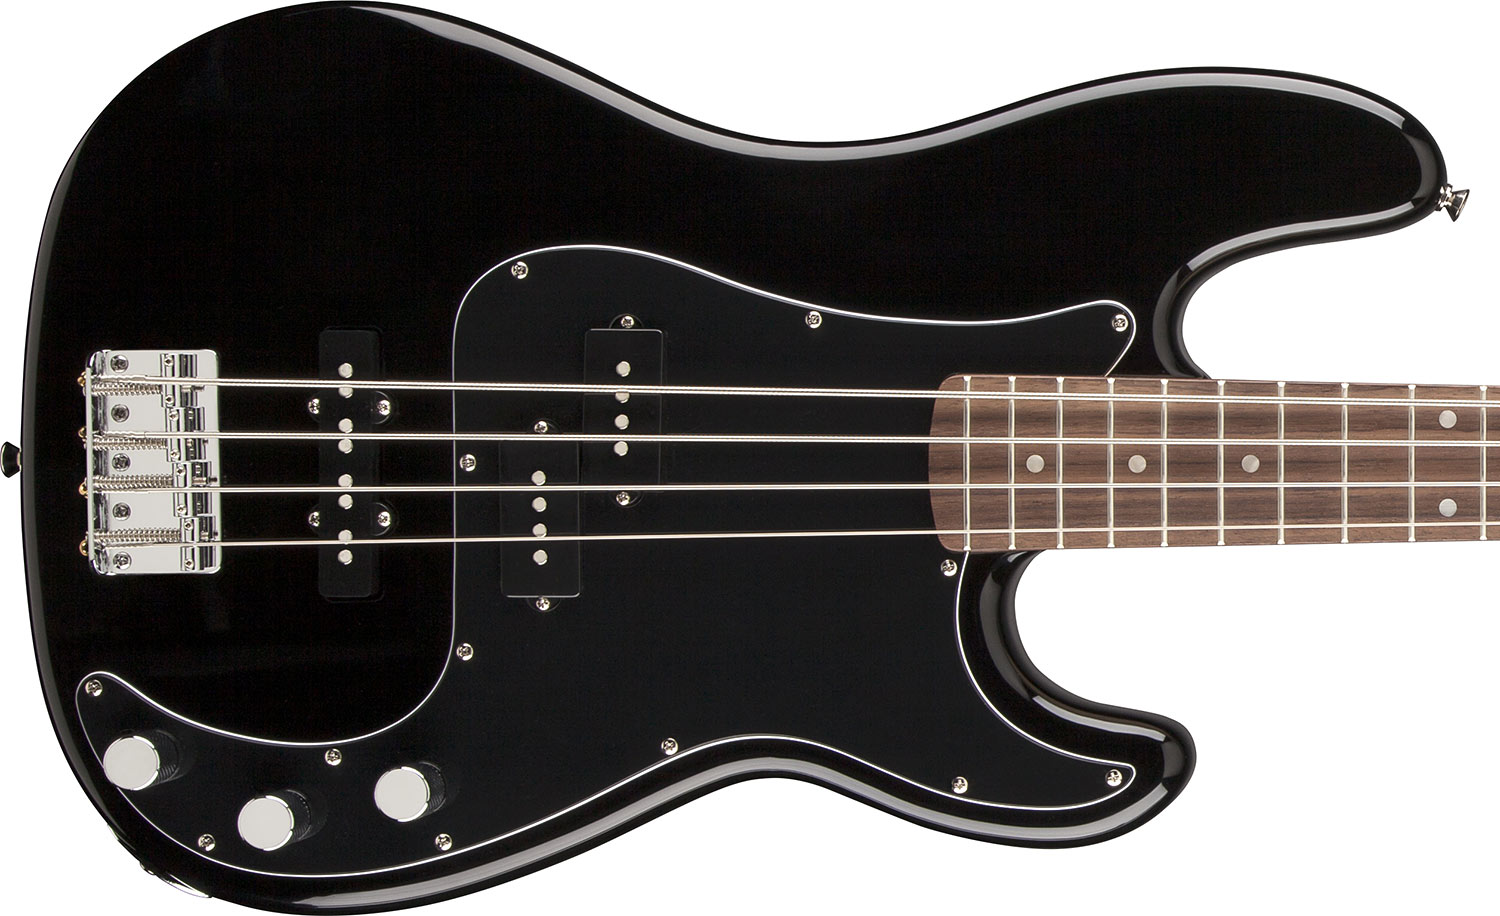 Squier Precision Bass Affinity Series Pj (rw) - Black - Solid body electric bass - Variation 1